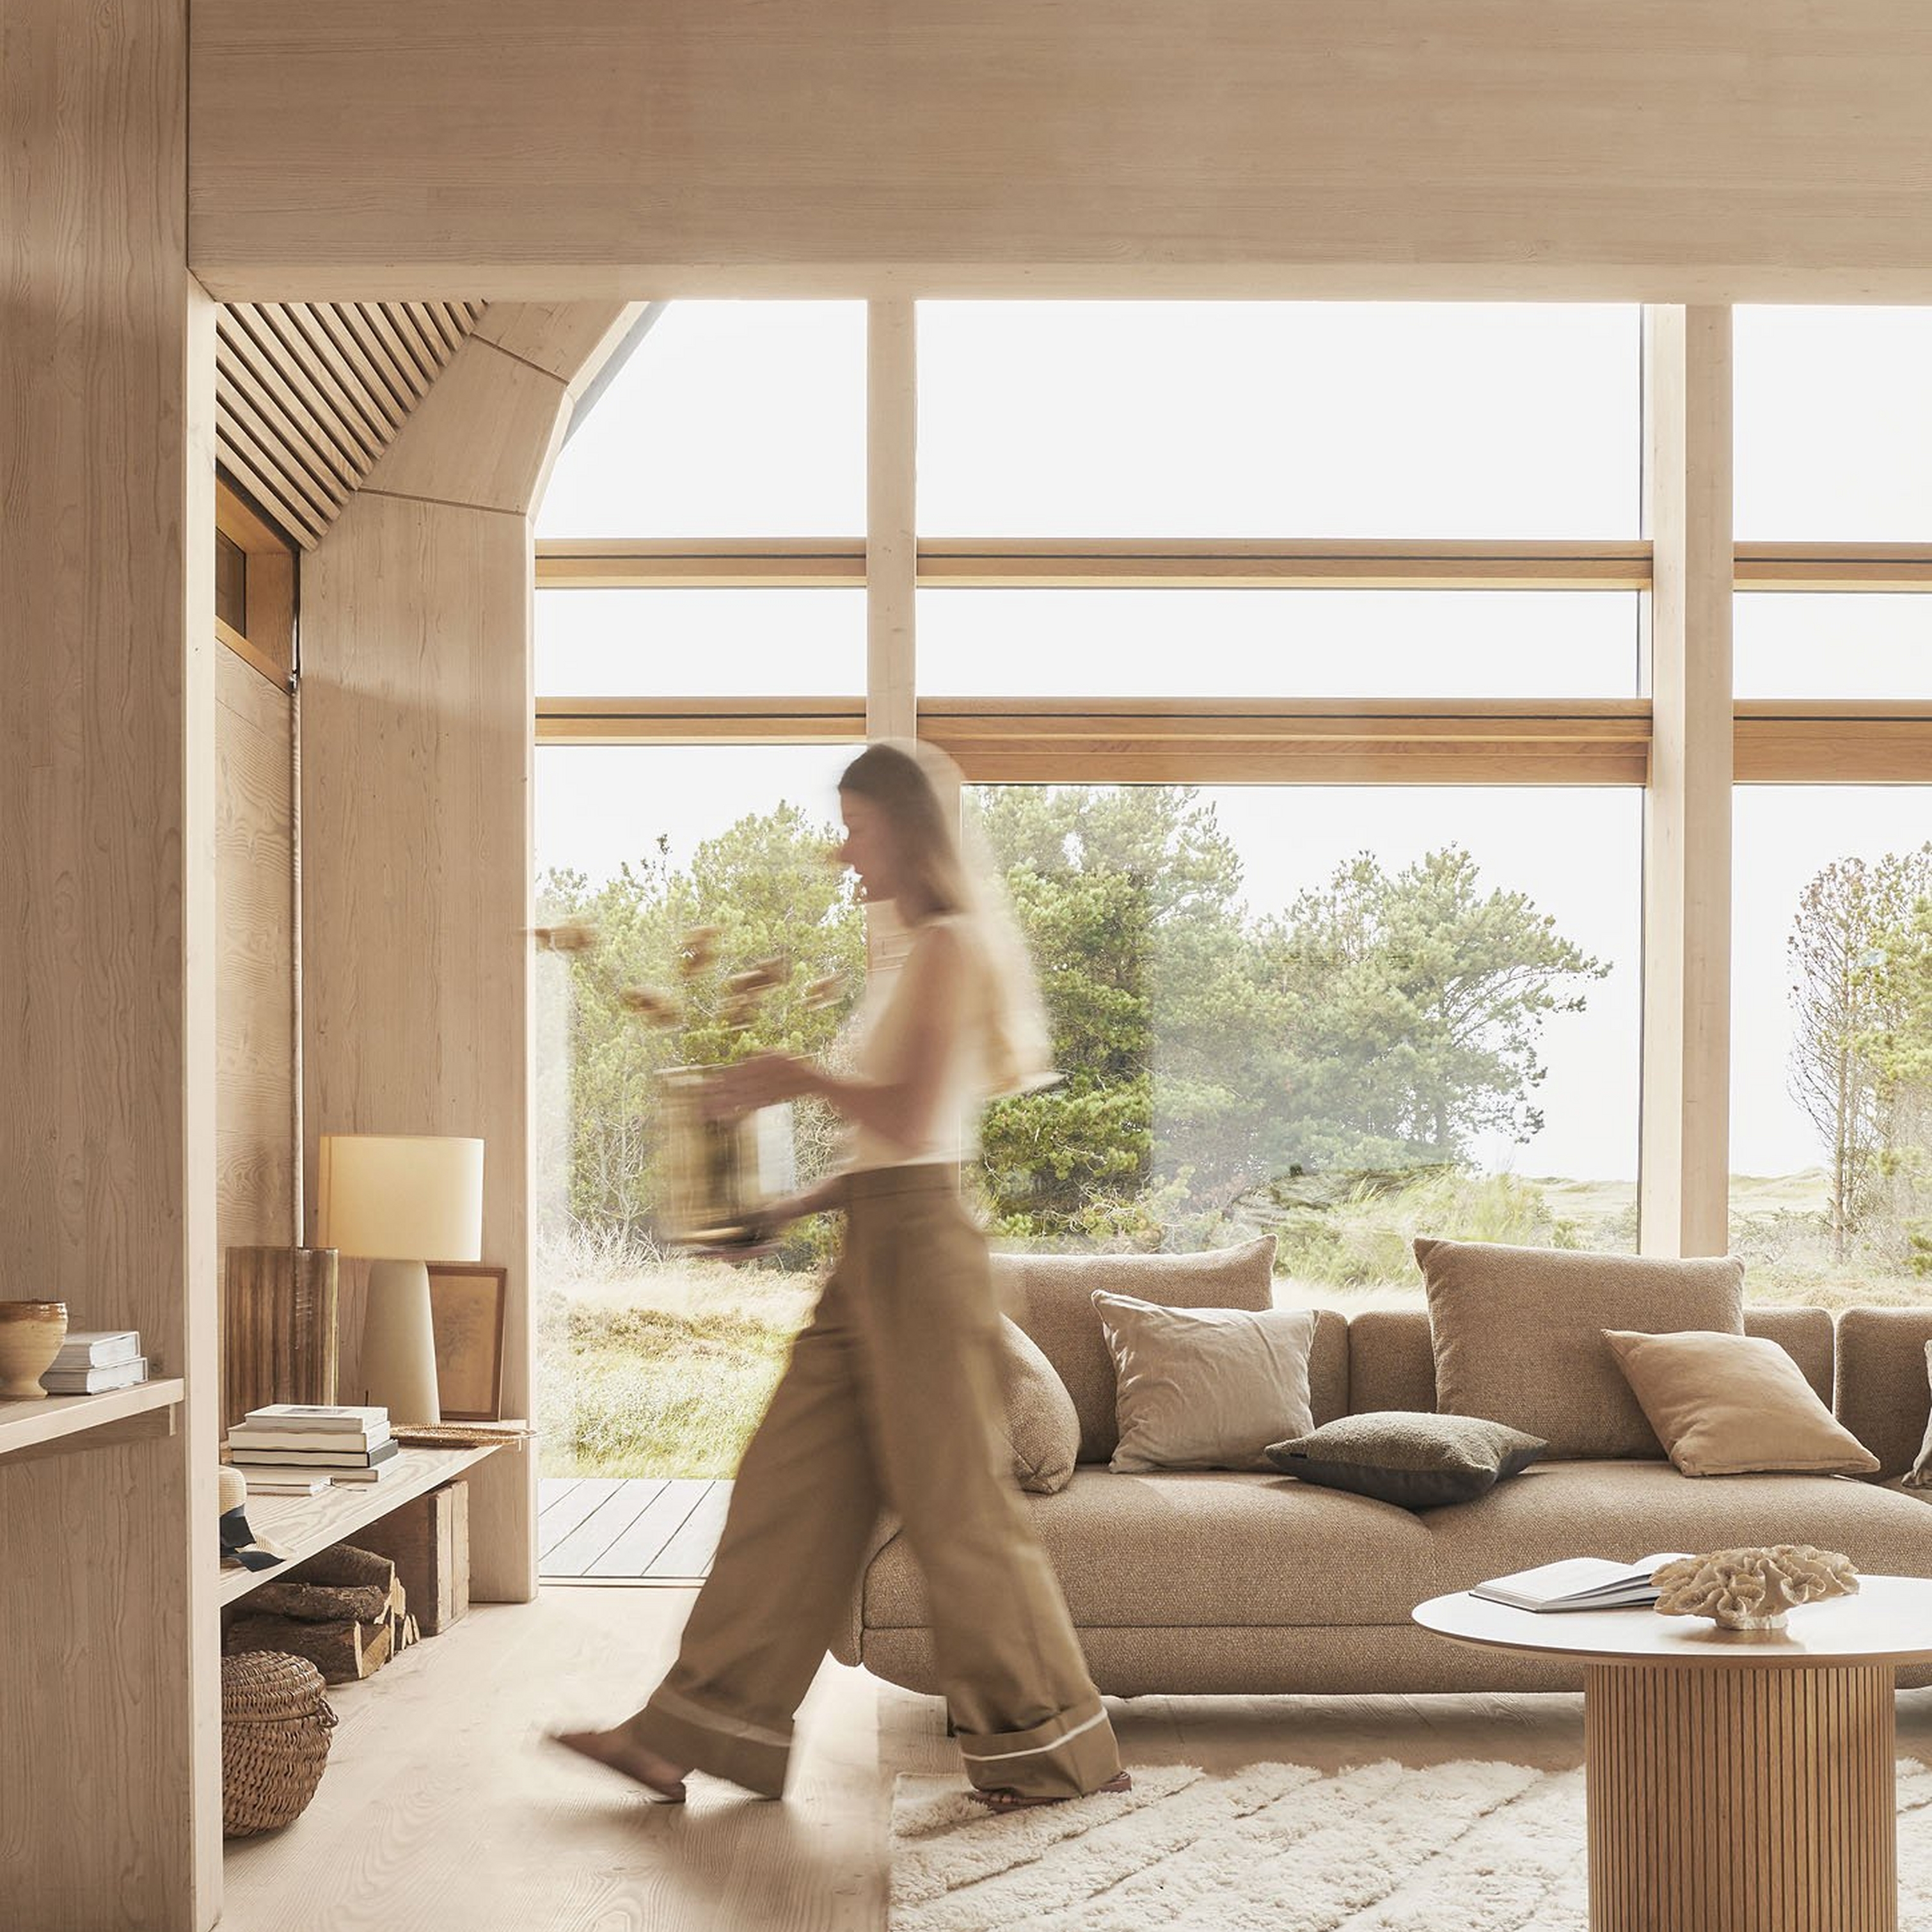 Motion-blurred person walking in a sunlit, wood-beamed room with a cozy sofa